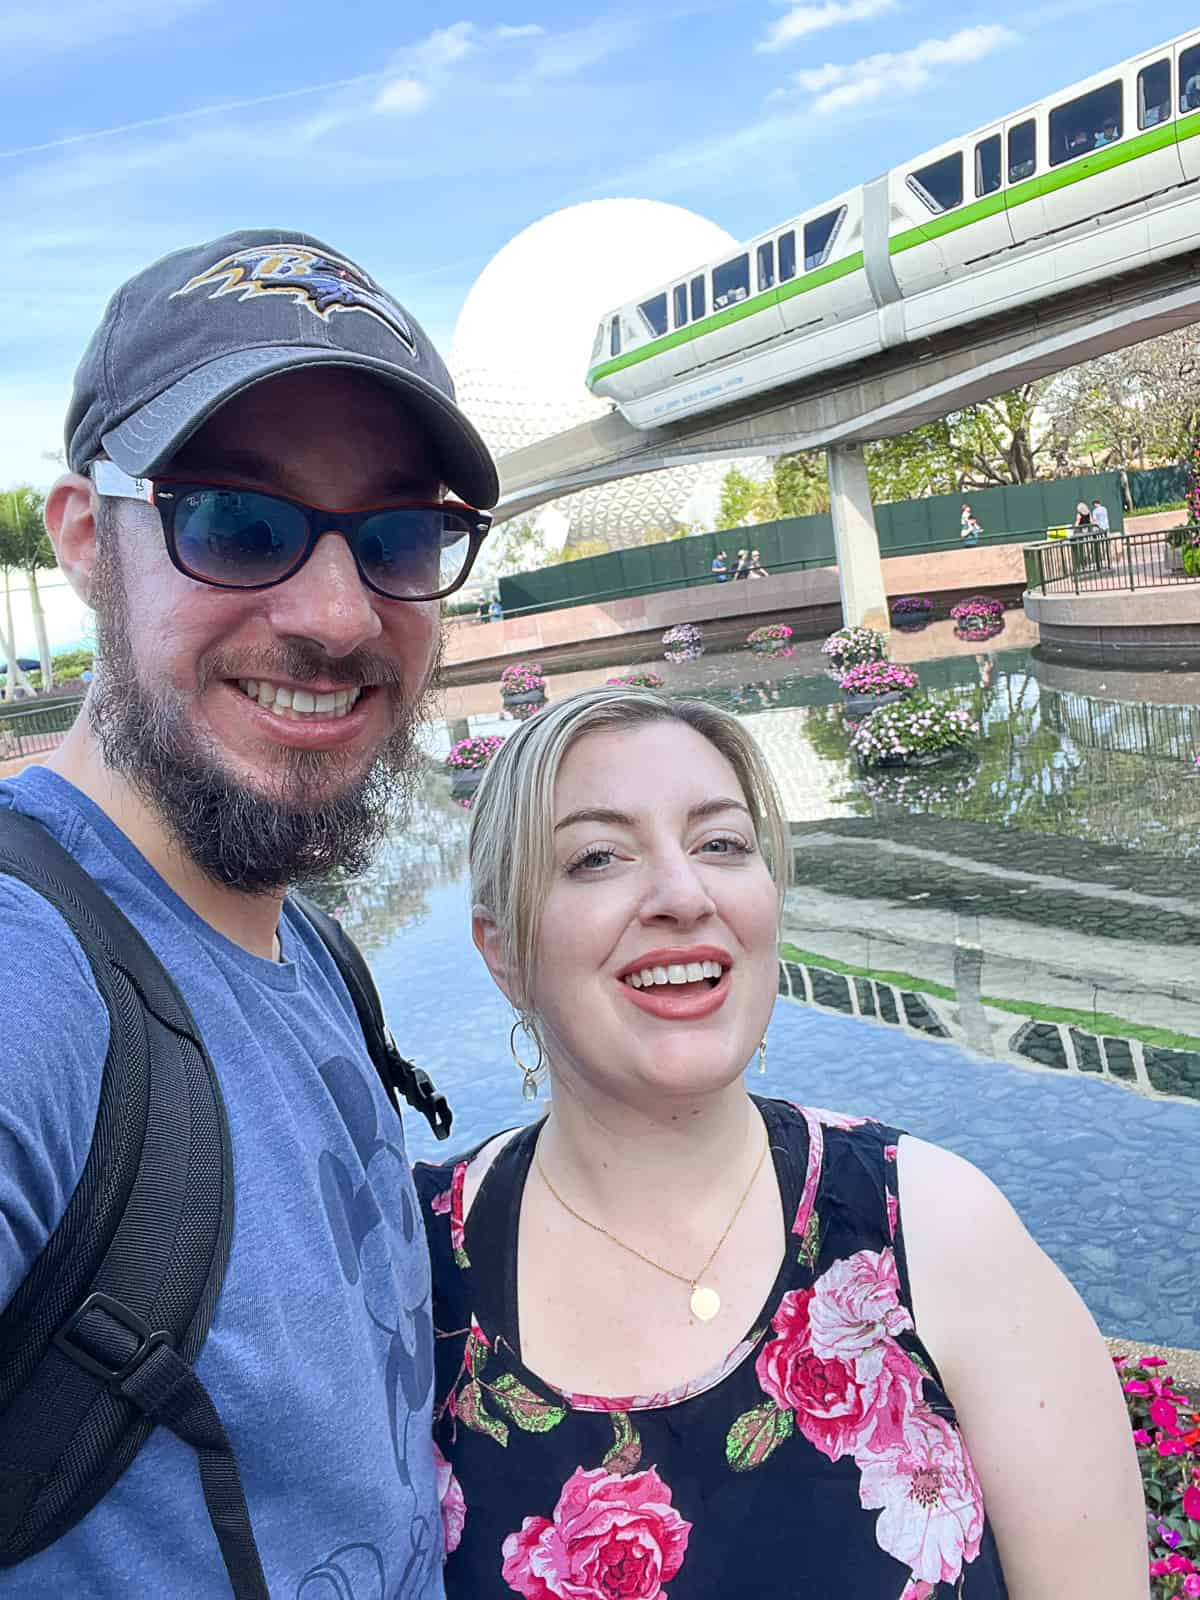 Disney Vacation Tourists near of Monorail and Epcot Ball